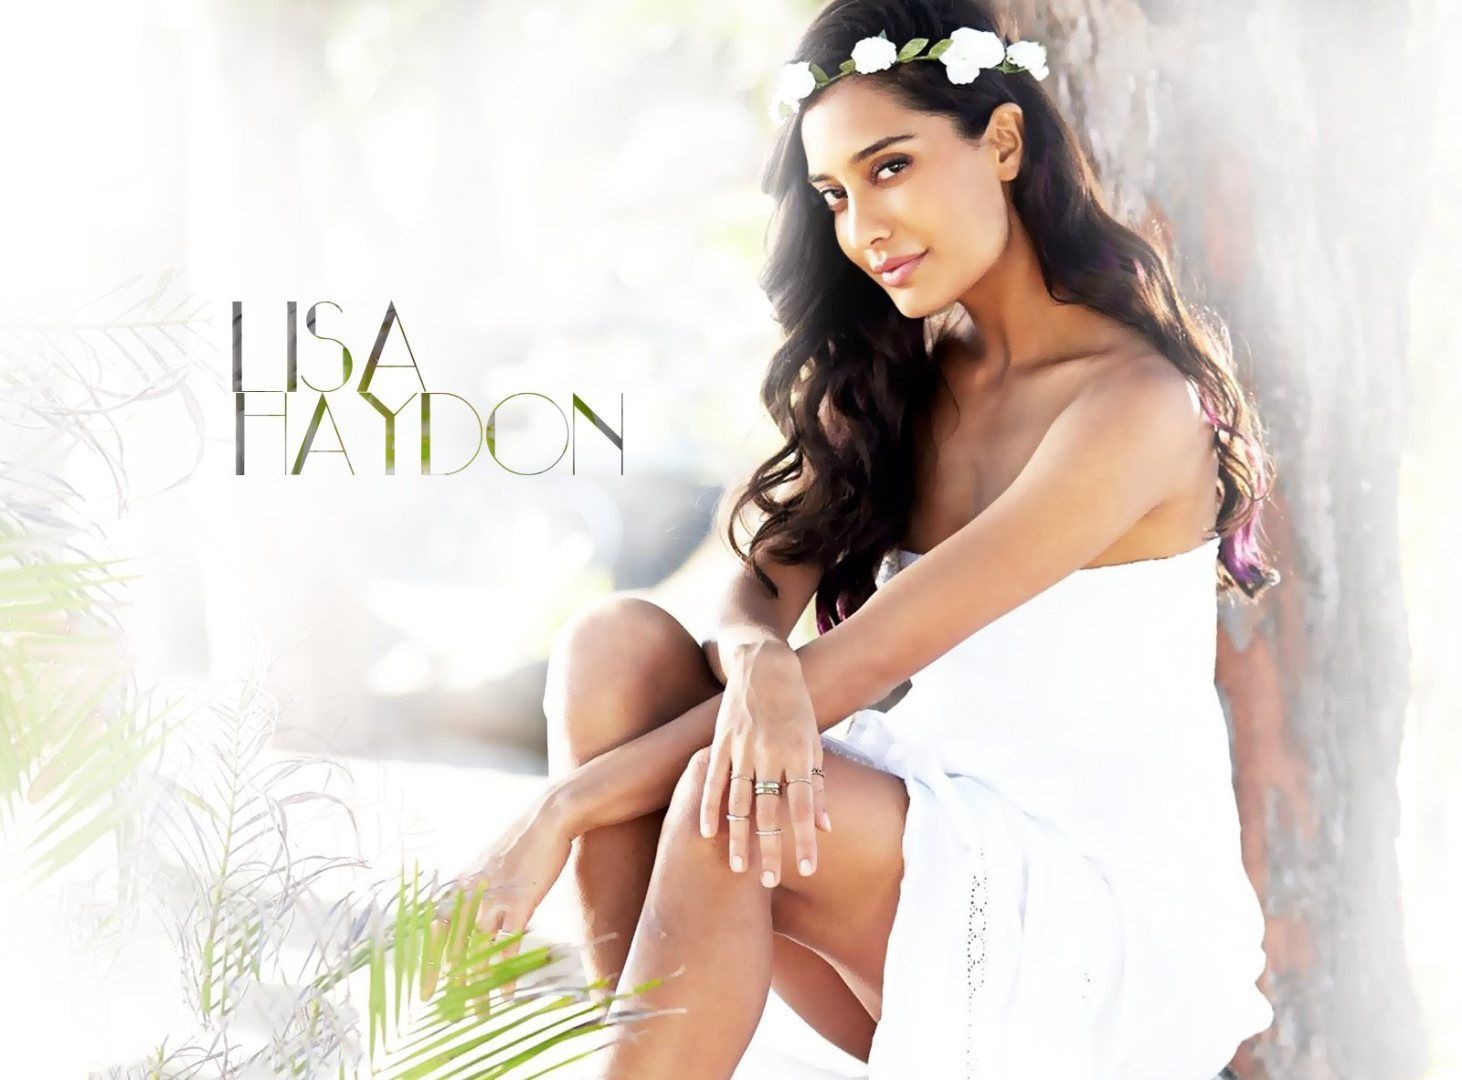 Lisa Haydon Top Best Image Of All Time